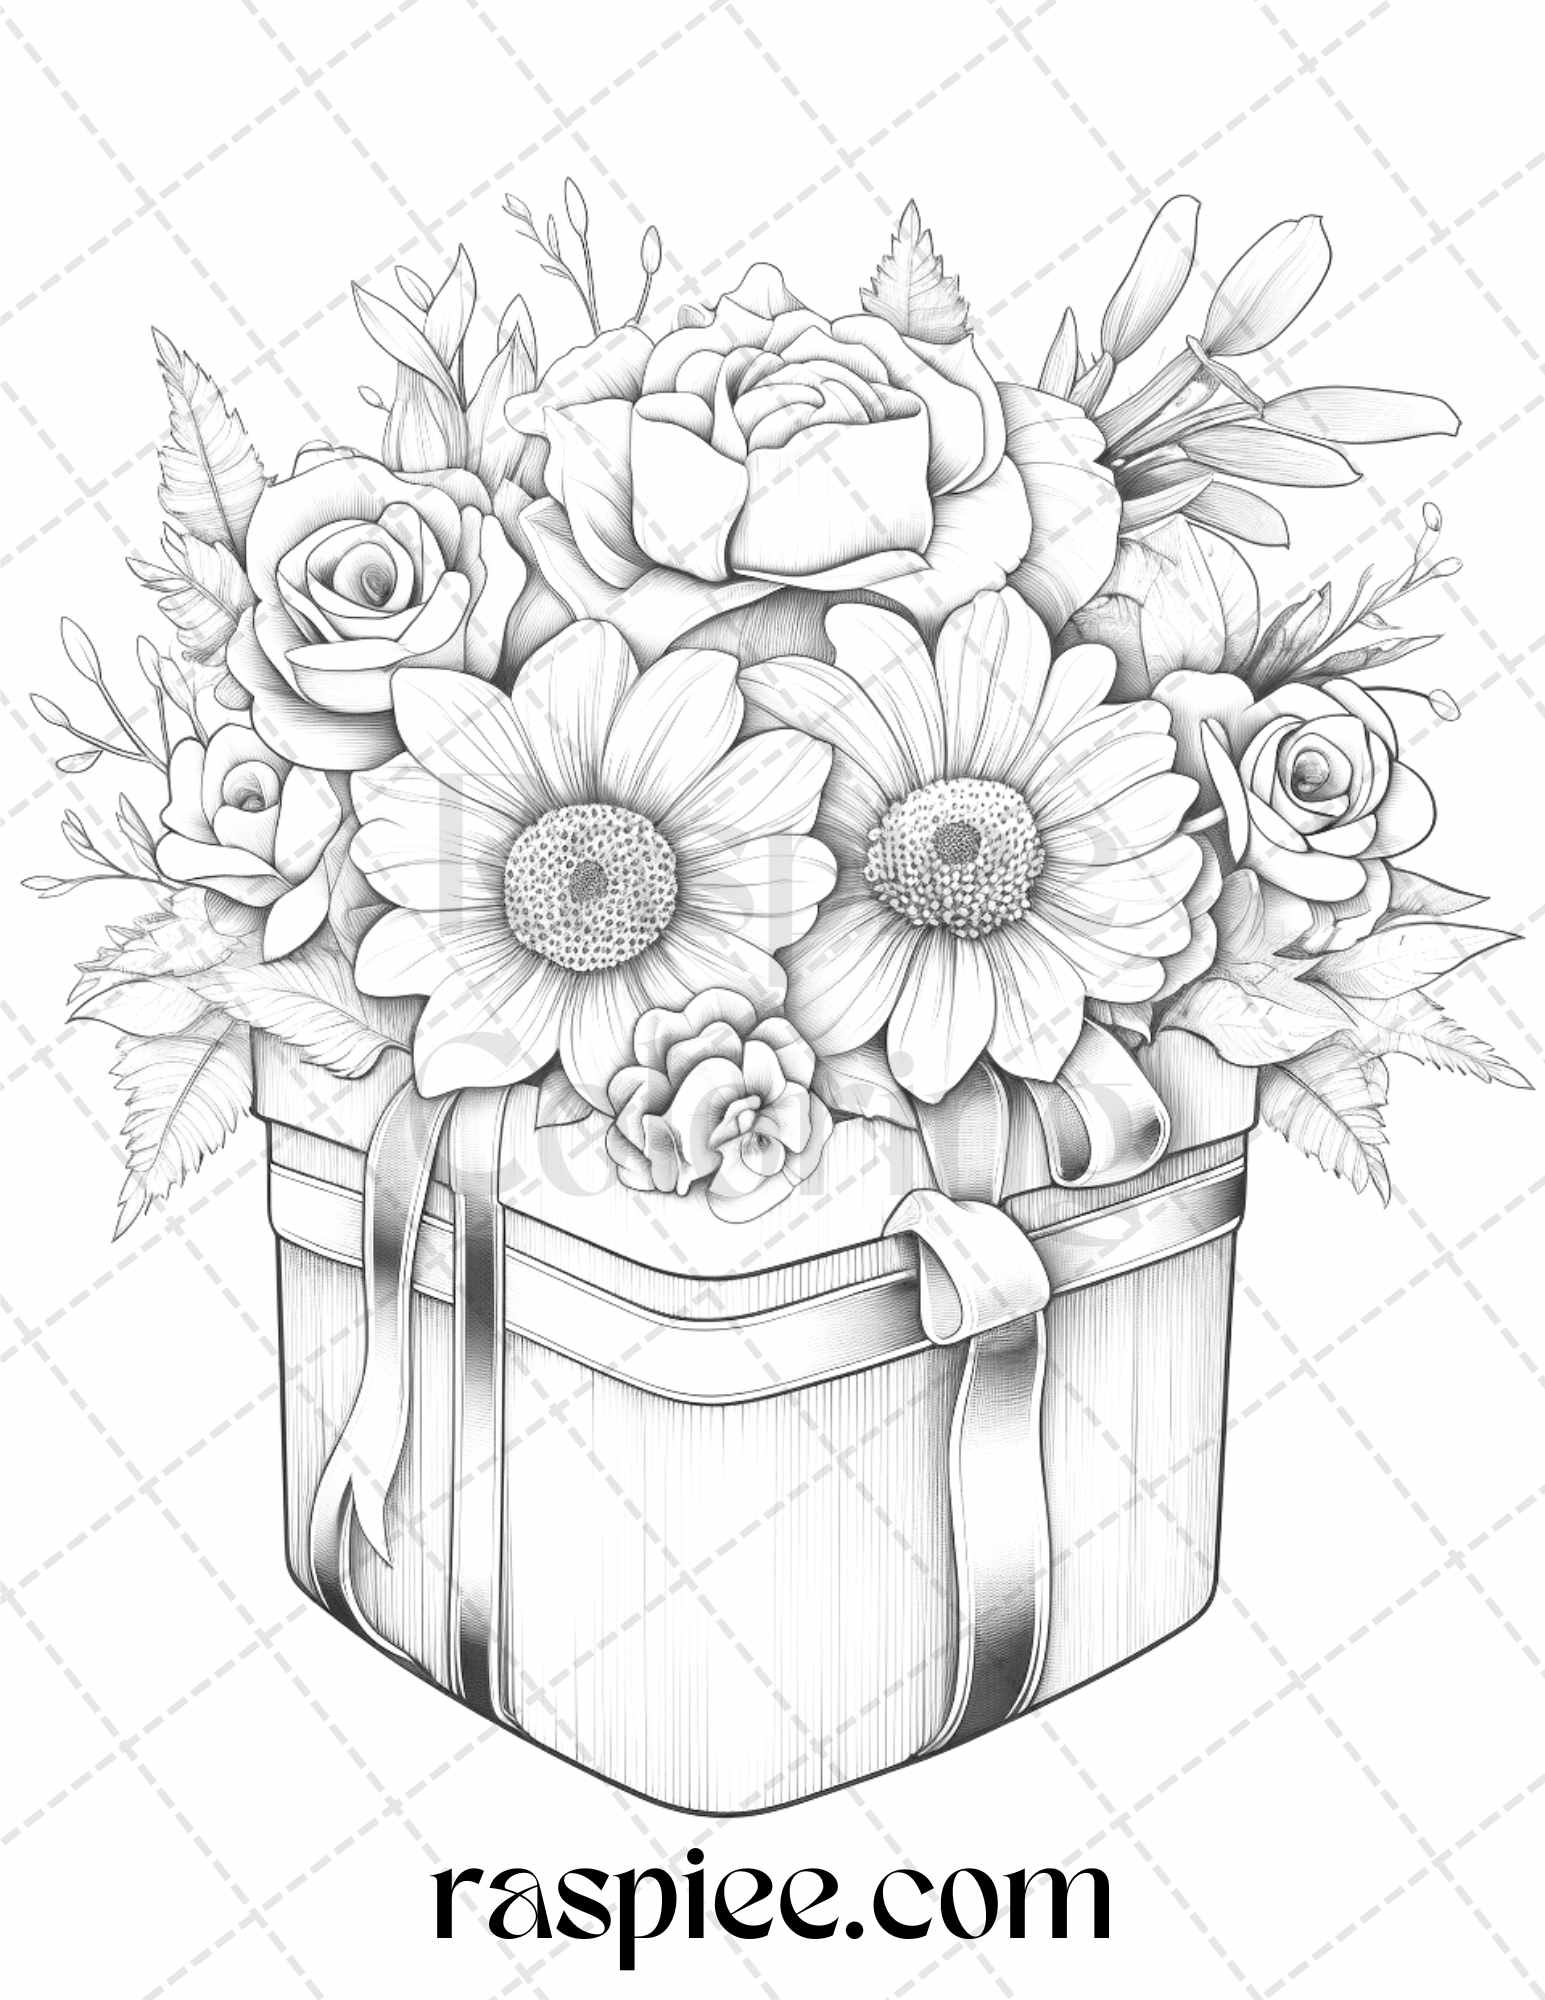 40 Flower Gift Box Grayscale Coloring Pages Printable for Adults Kids, PDF File Instant Download - Raspiee Coloring